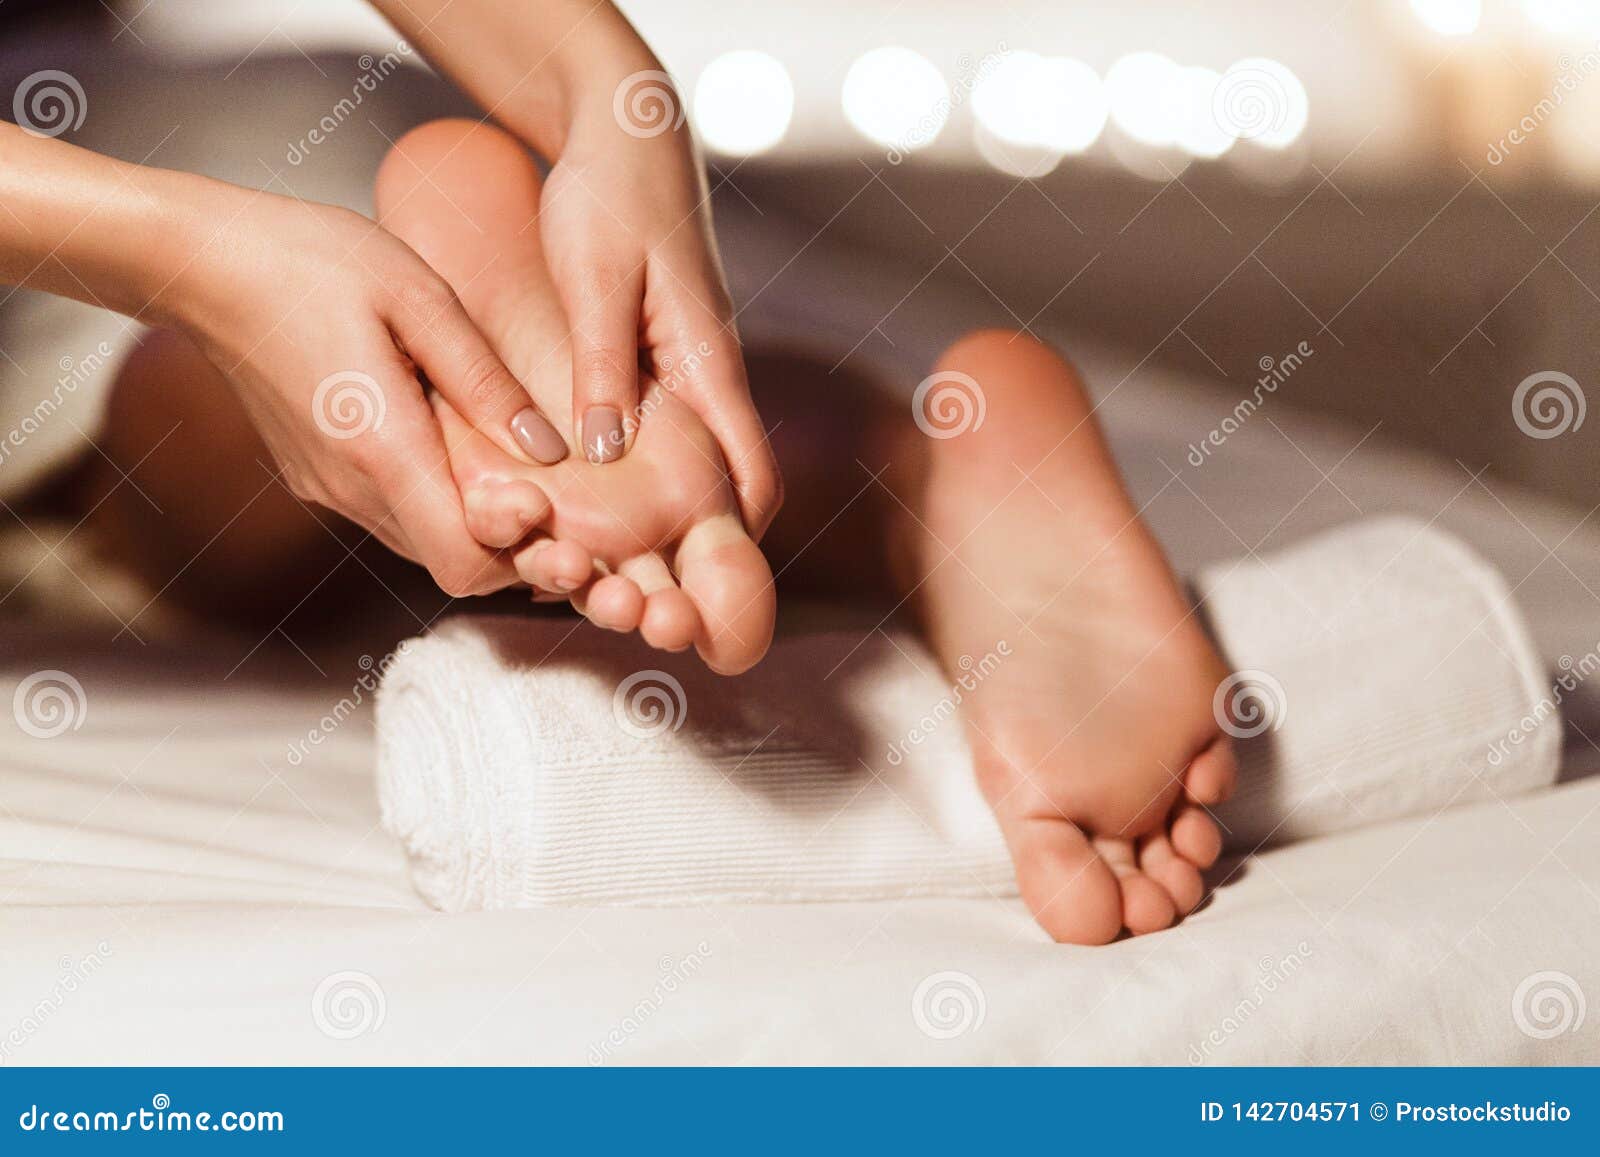 Woman Receiving Foot Massage At Health Spa Stock Image Image Of